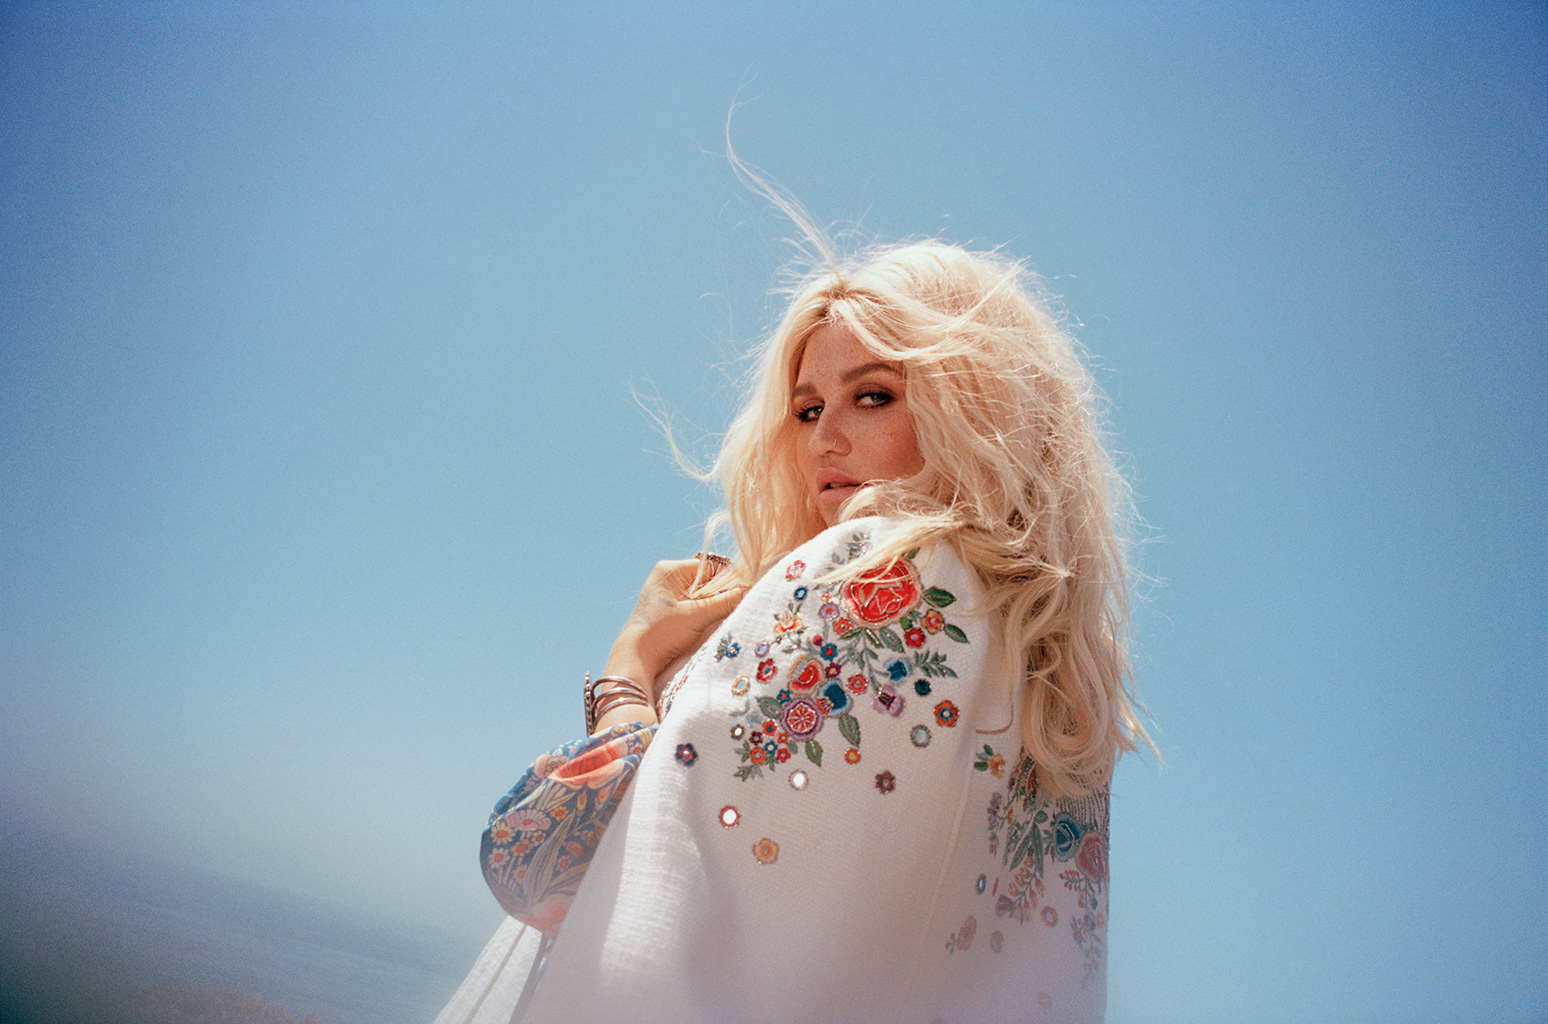 Kesha unveils black and white video for “Here Comes the Change”